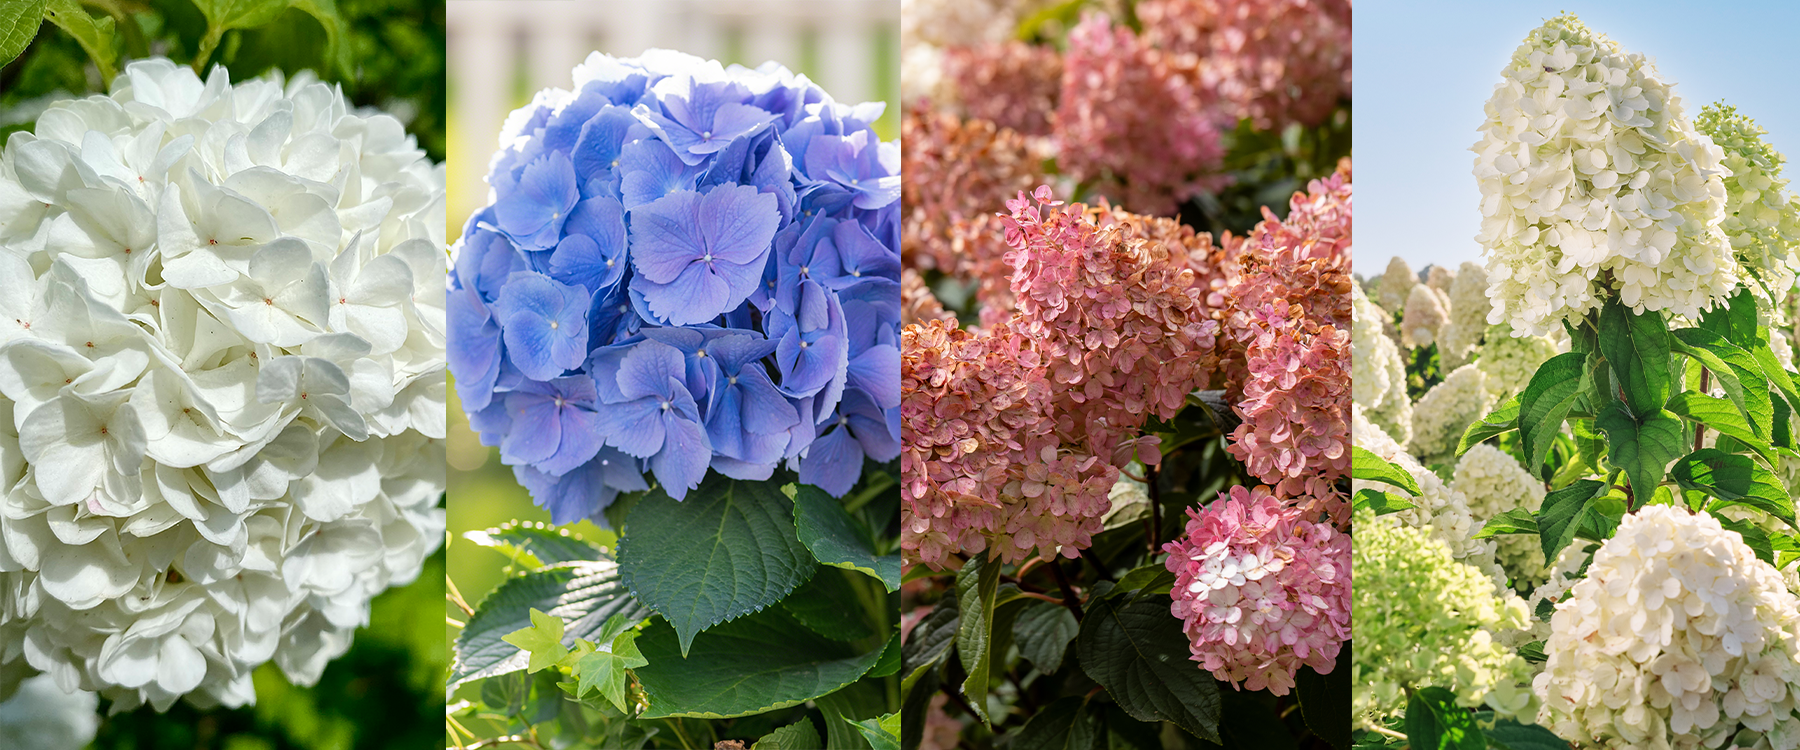 5 Pruning Tips for Blooming Hydrangeas